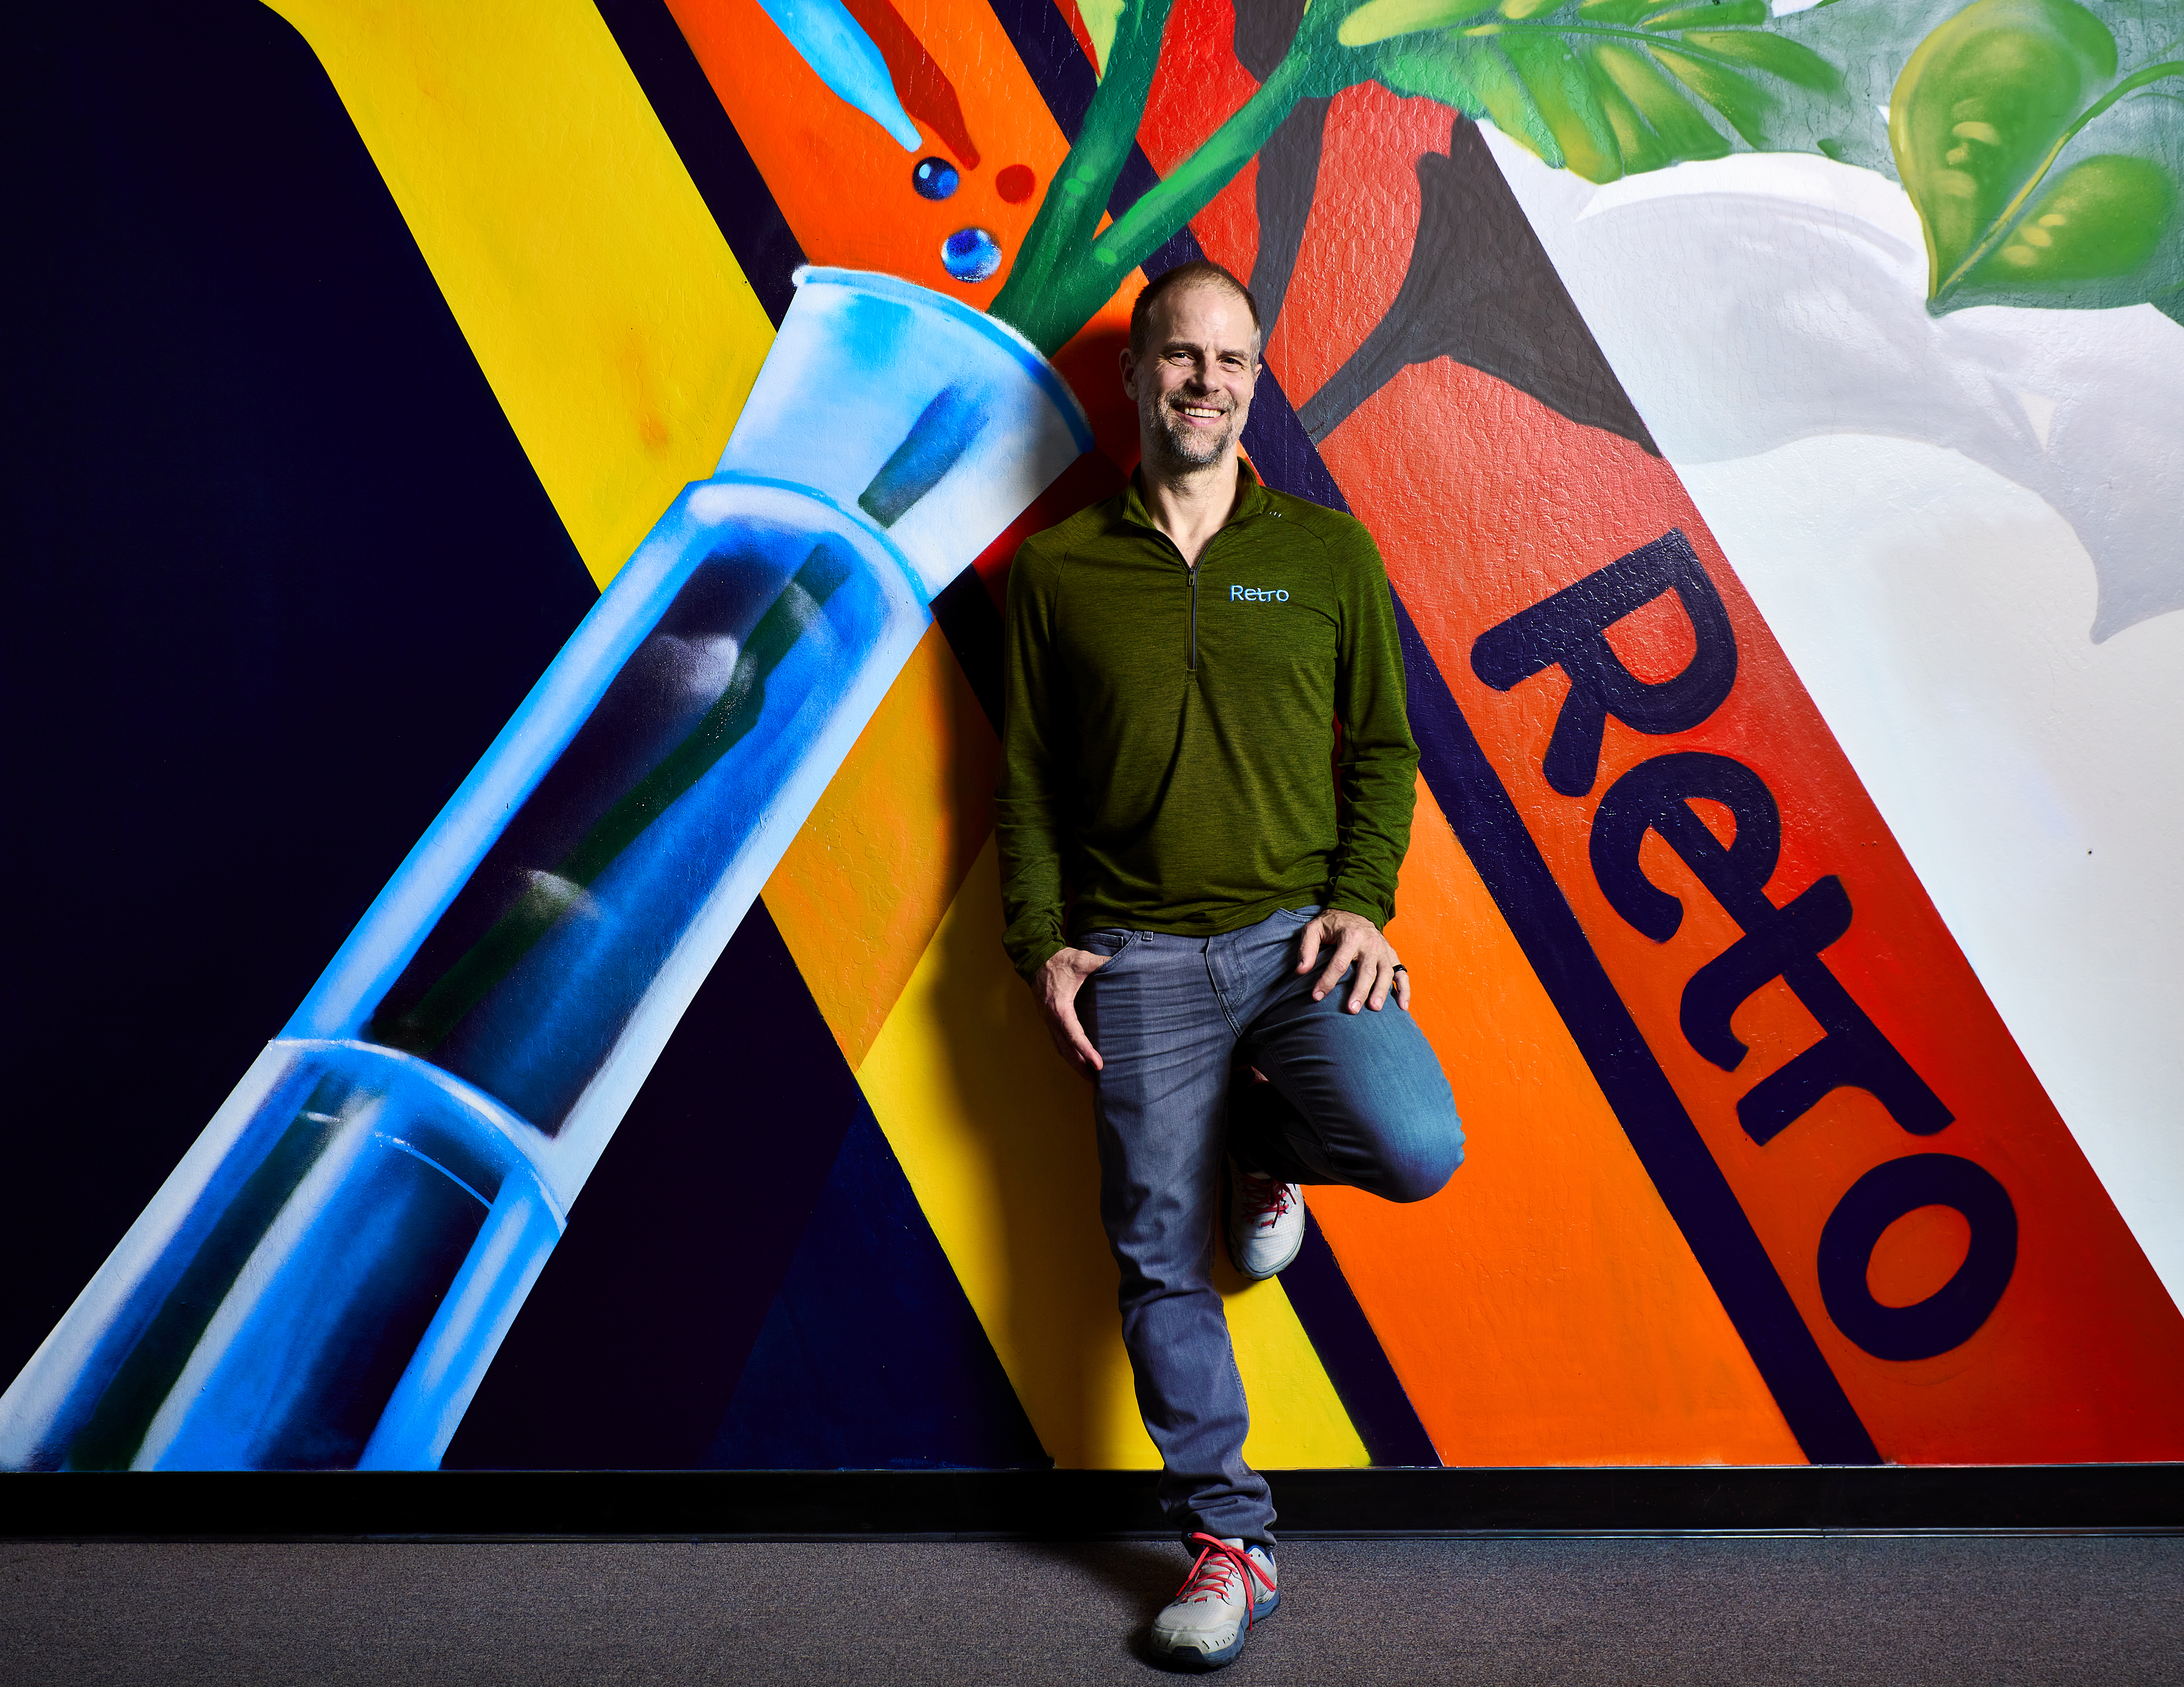 Joe Betts-LaCroix leans against a wall with a mural on it, featuring a test tube with a green stem coming out the top and yellow orange and red lines, with the word Retro written on the red line